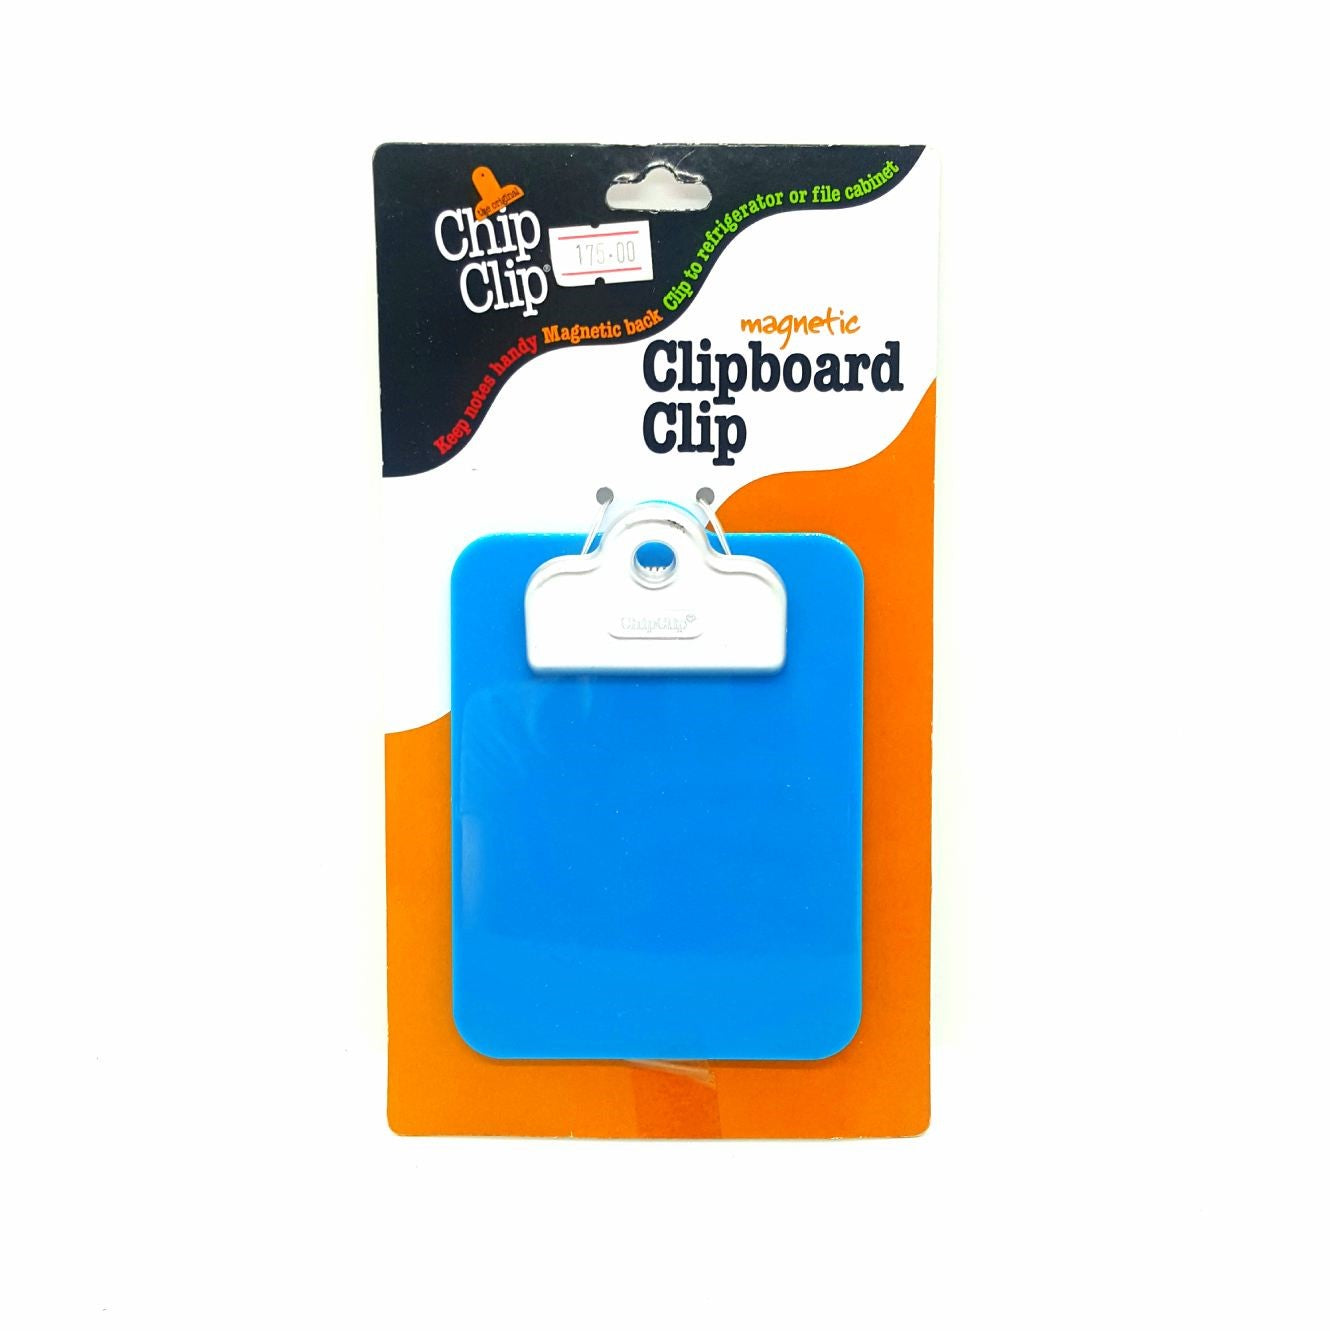 Squish Chip Clip Magnetic Clipboard Clip in Blue